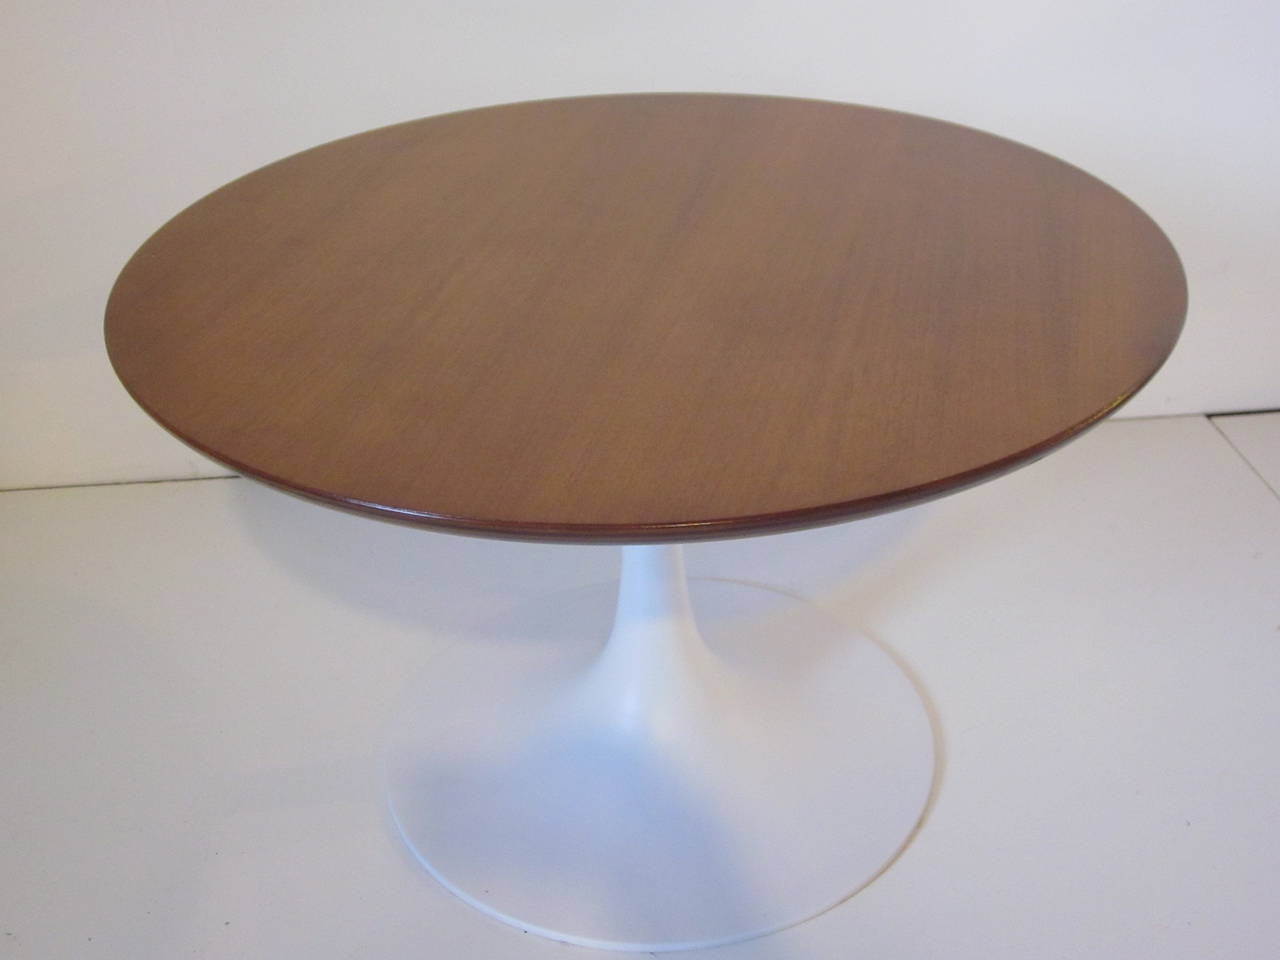 A tulip side table with satin white metal base and round walnut top in the style of Knoll International and Saarinen.